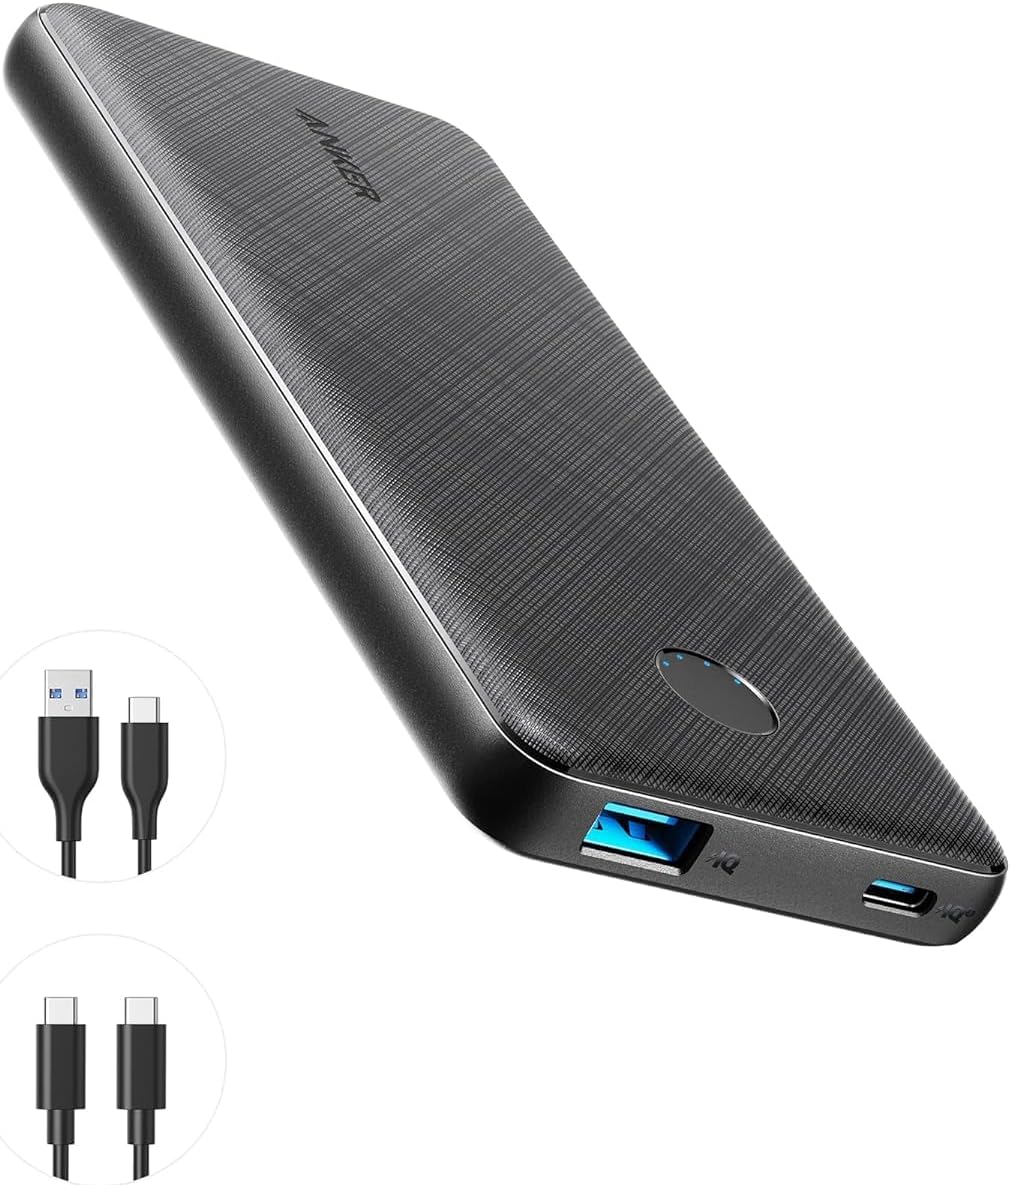 Anker Portable Charger, USB-C PortableCharger 10000mAh with 20W Power Delivery, 523 Power Bank